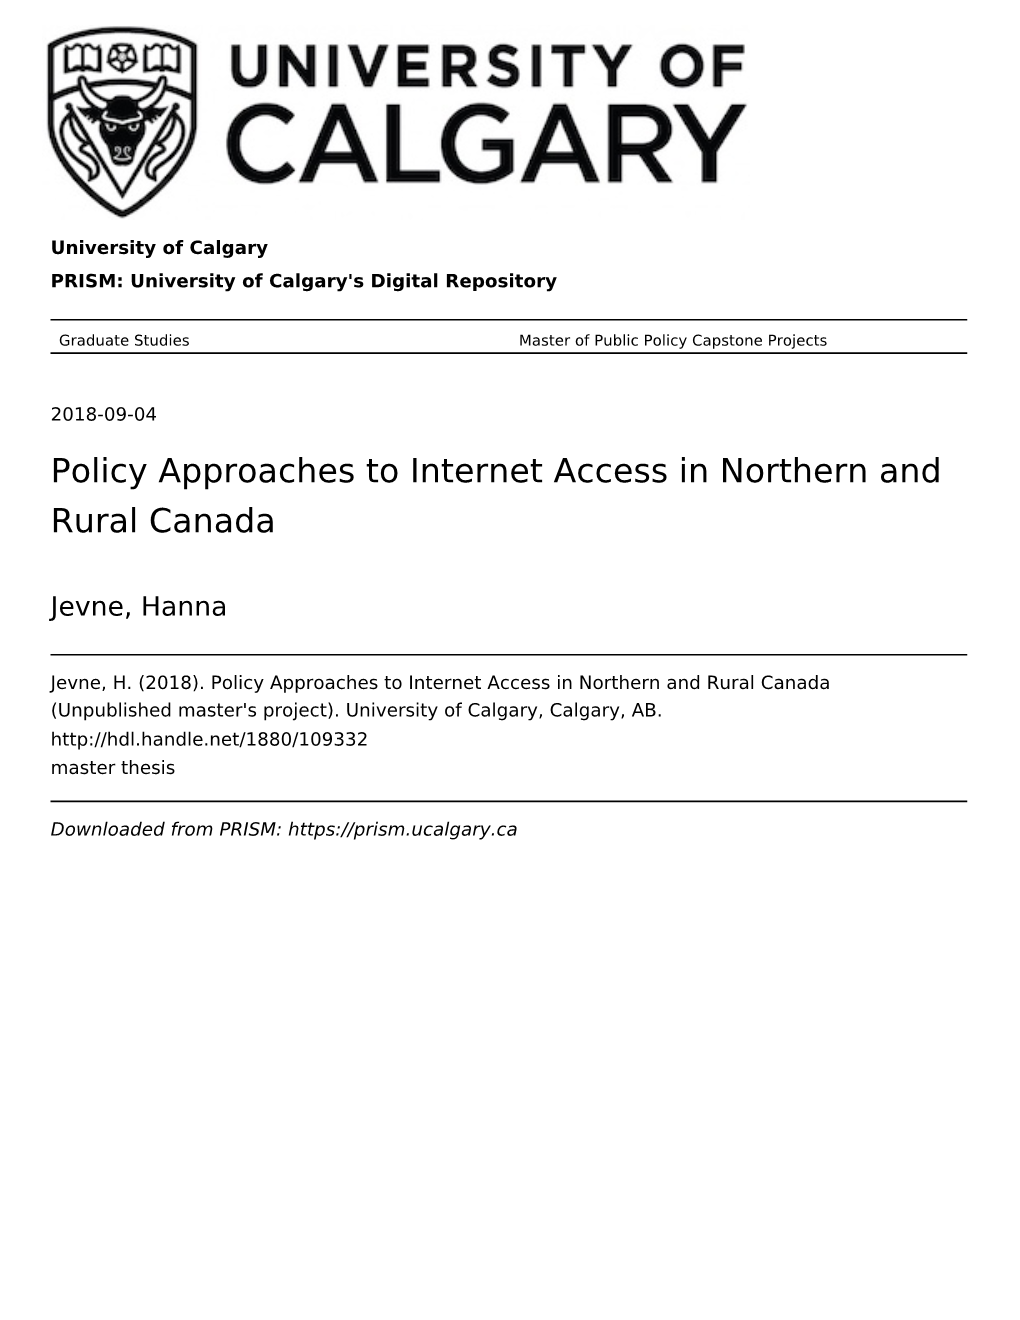 Policy Approaches to Internet Access in Northern and Rural Canada